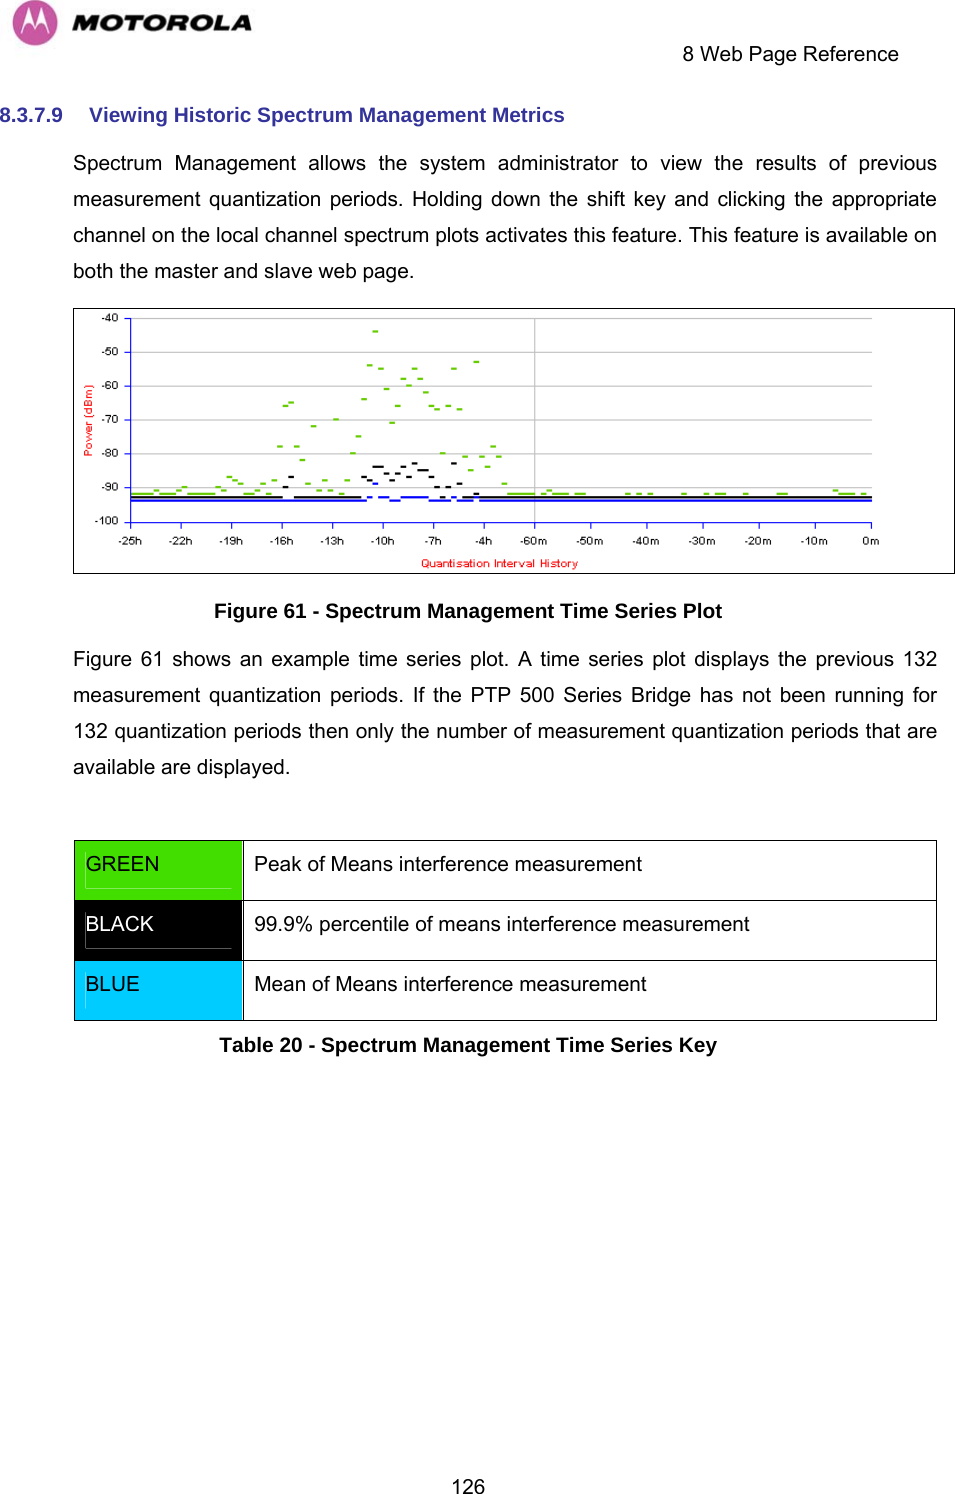     8 Web Page Reference  1268.3.7.9  Viewing Historic Spectrum Management Metrics Spectrum Management allows the system administrator to view the results of previous measurement quantization periods. Holding down the shift key and clicking the appropriate channel on the local channel spectrum plots activates this feature. This feature is available on both the master and slave web page.  Figure 61 - Spectrum Management Time Series Plot Figure 61 shows an example time series plot. A time series plot displays the previous 132 measurement quantization periods. If the PTP 500 Series Bridge has not been running for 132 quantization periods then only the number of measurement quantization periods that are available are displayed.   GREEN  Peak of Means interference measurement BLACK  99.9% percentile of means interference measurement BLUE  Mean of Means interference measurement Table 20 - Spectrum Management Time Series Key 